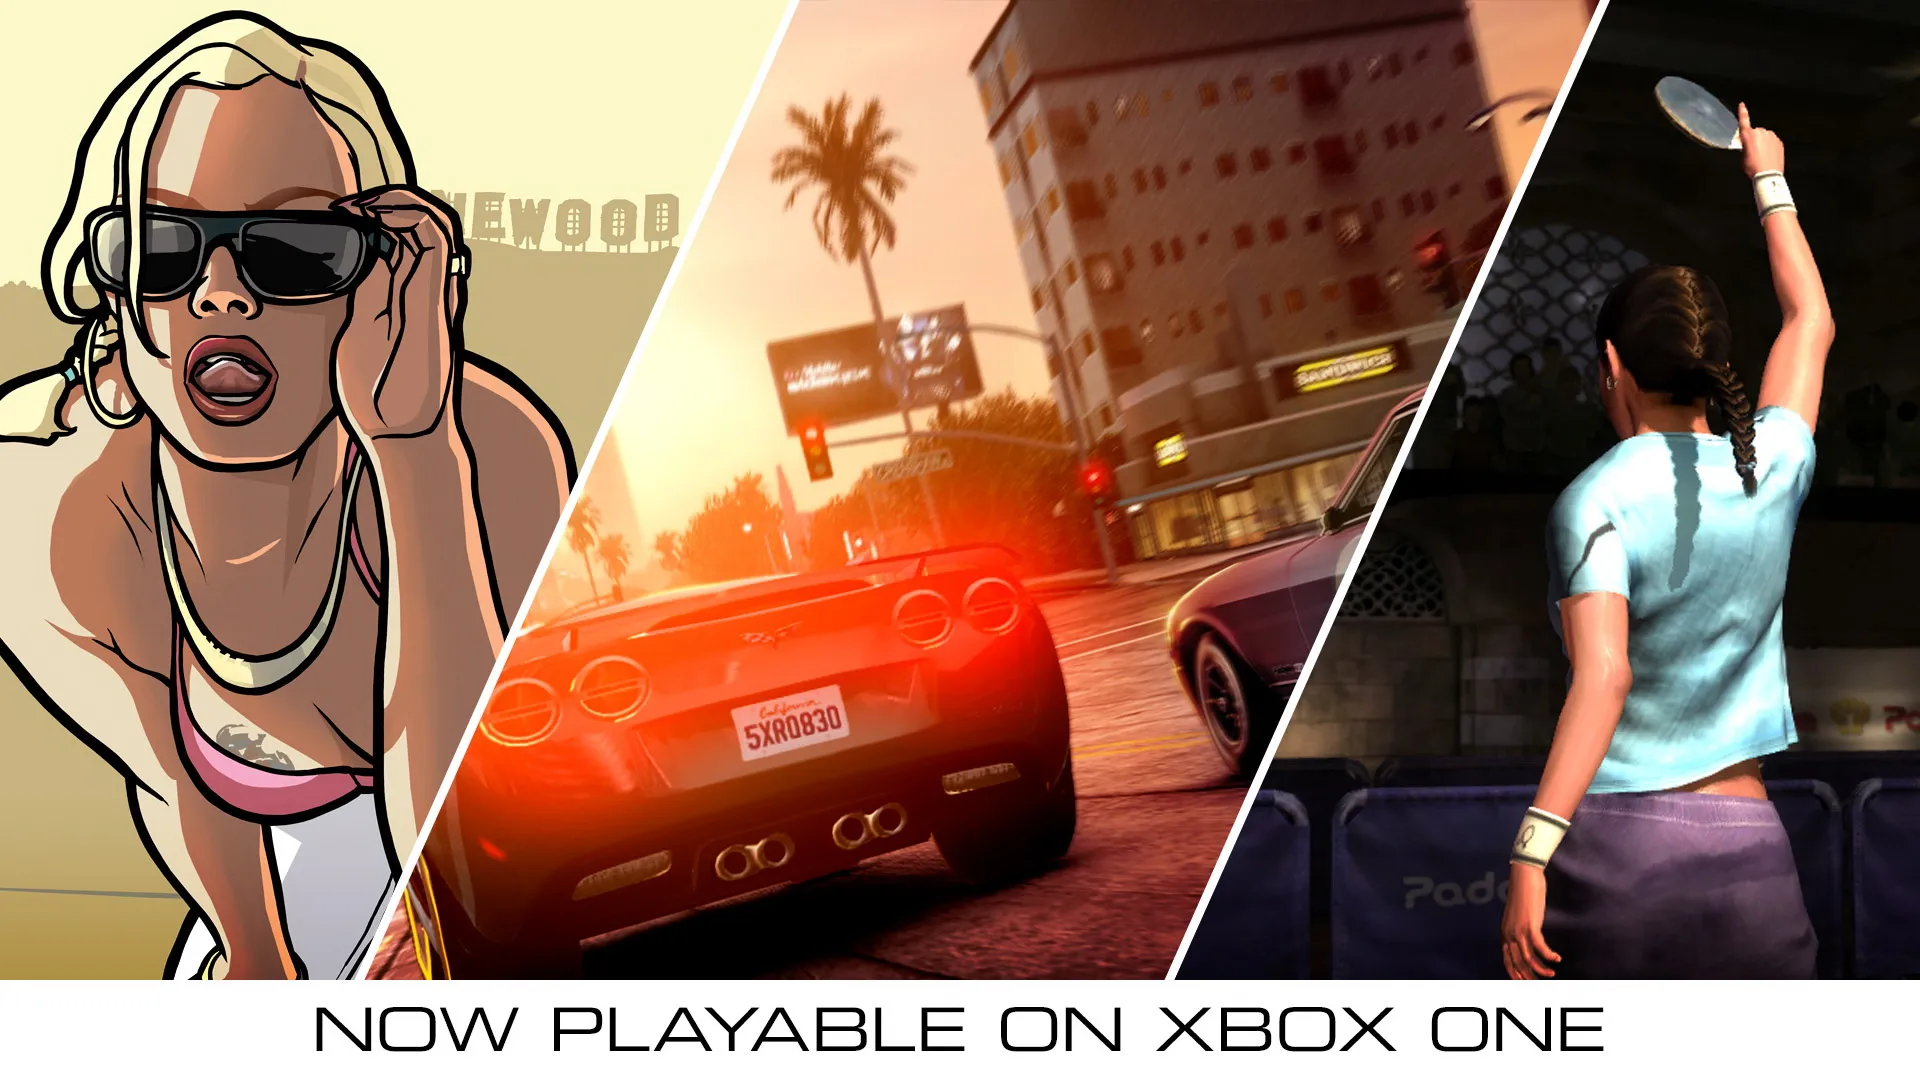 GTA San Andreas and More Now Playable on Xbox One with Backward Compatibility